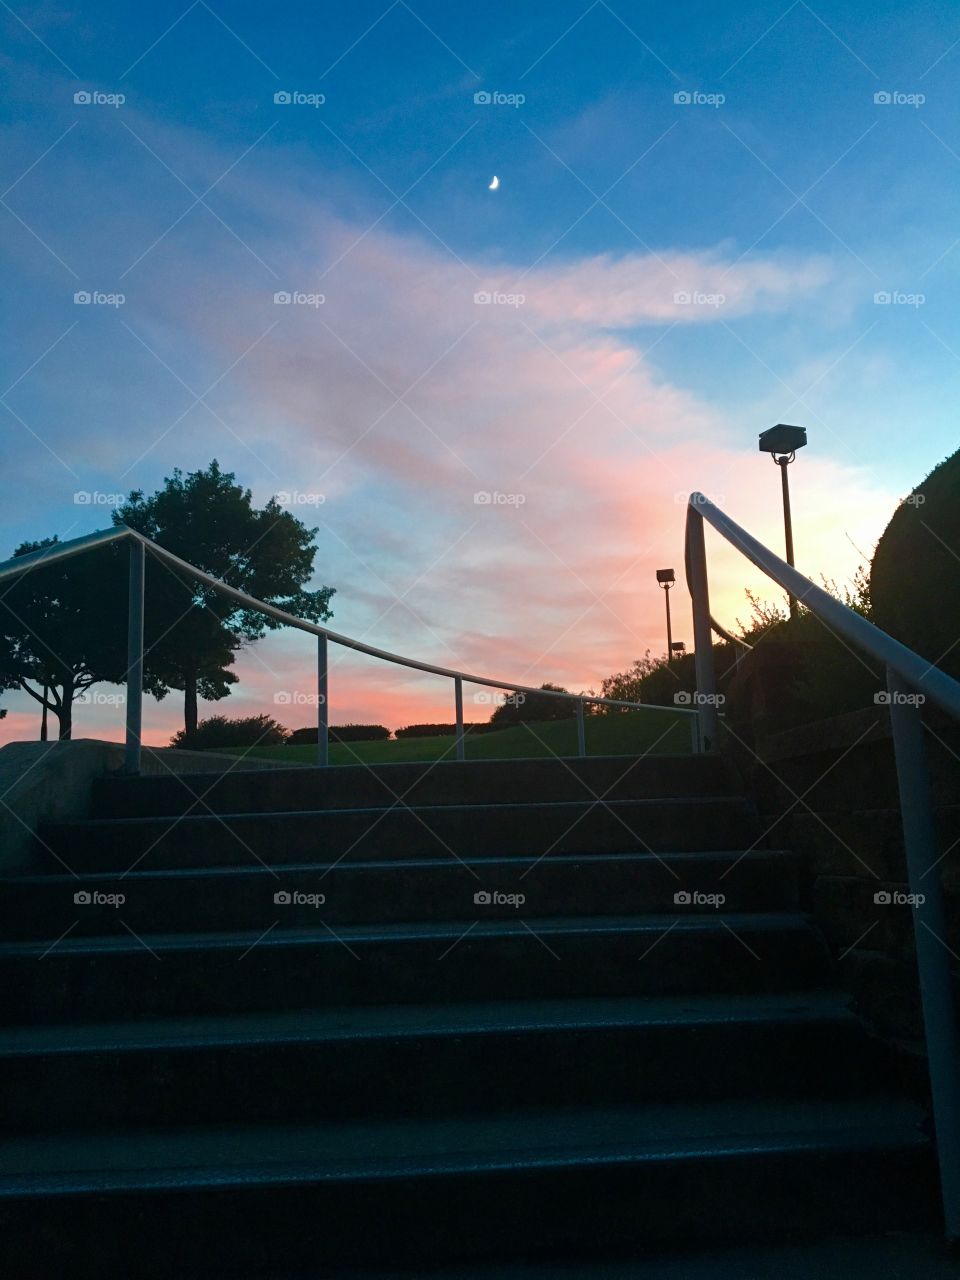 Sky coming out of school last night 